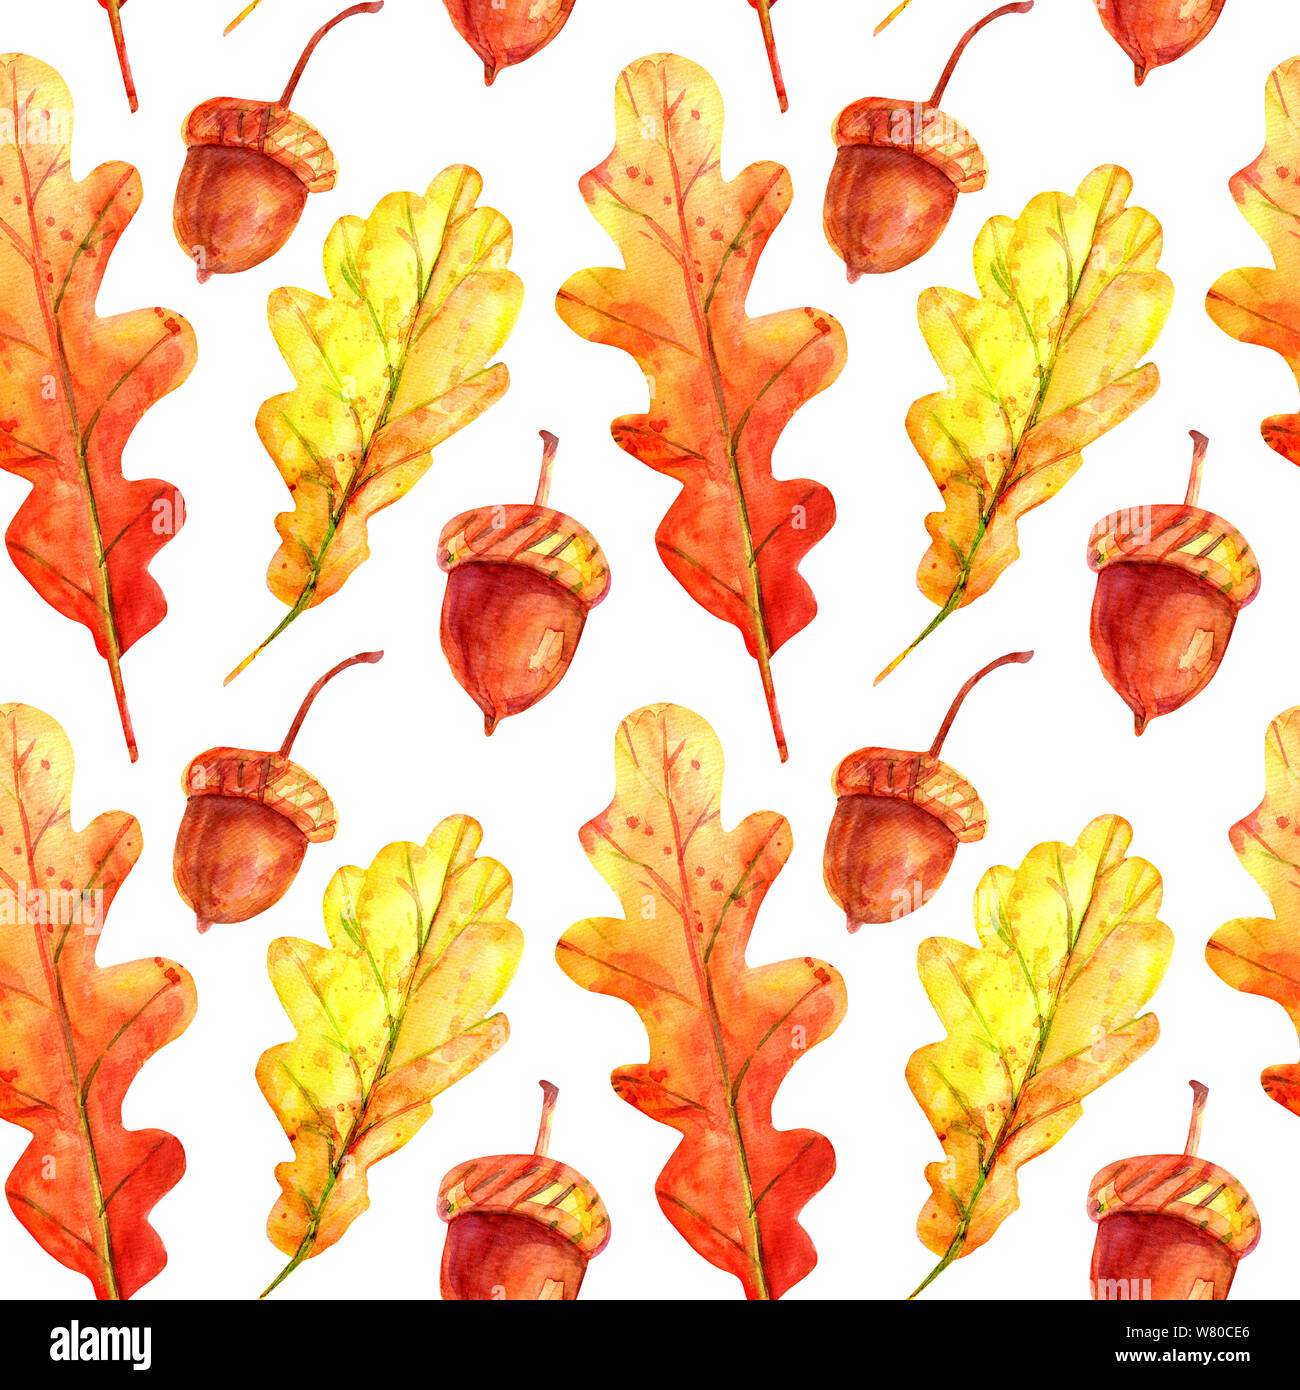 Seamless pattern with oak leaves and acorns. Watercolor autumn leaves fallen orange and yellow with colorful drops and sprays on a white background. T Stock Photo